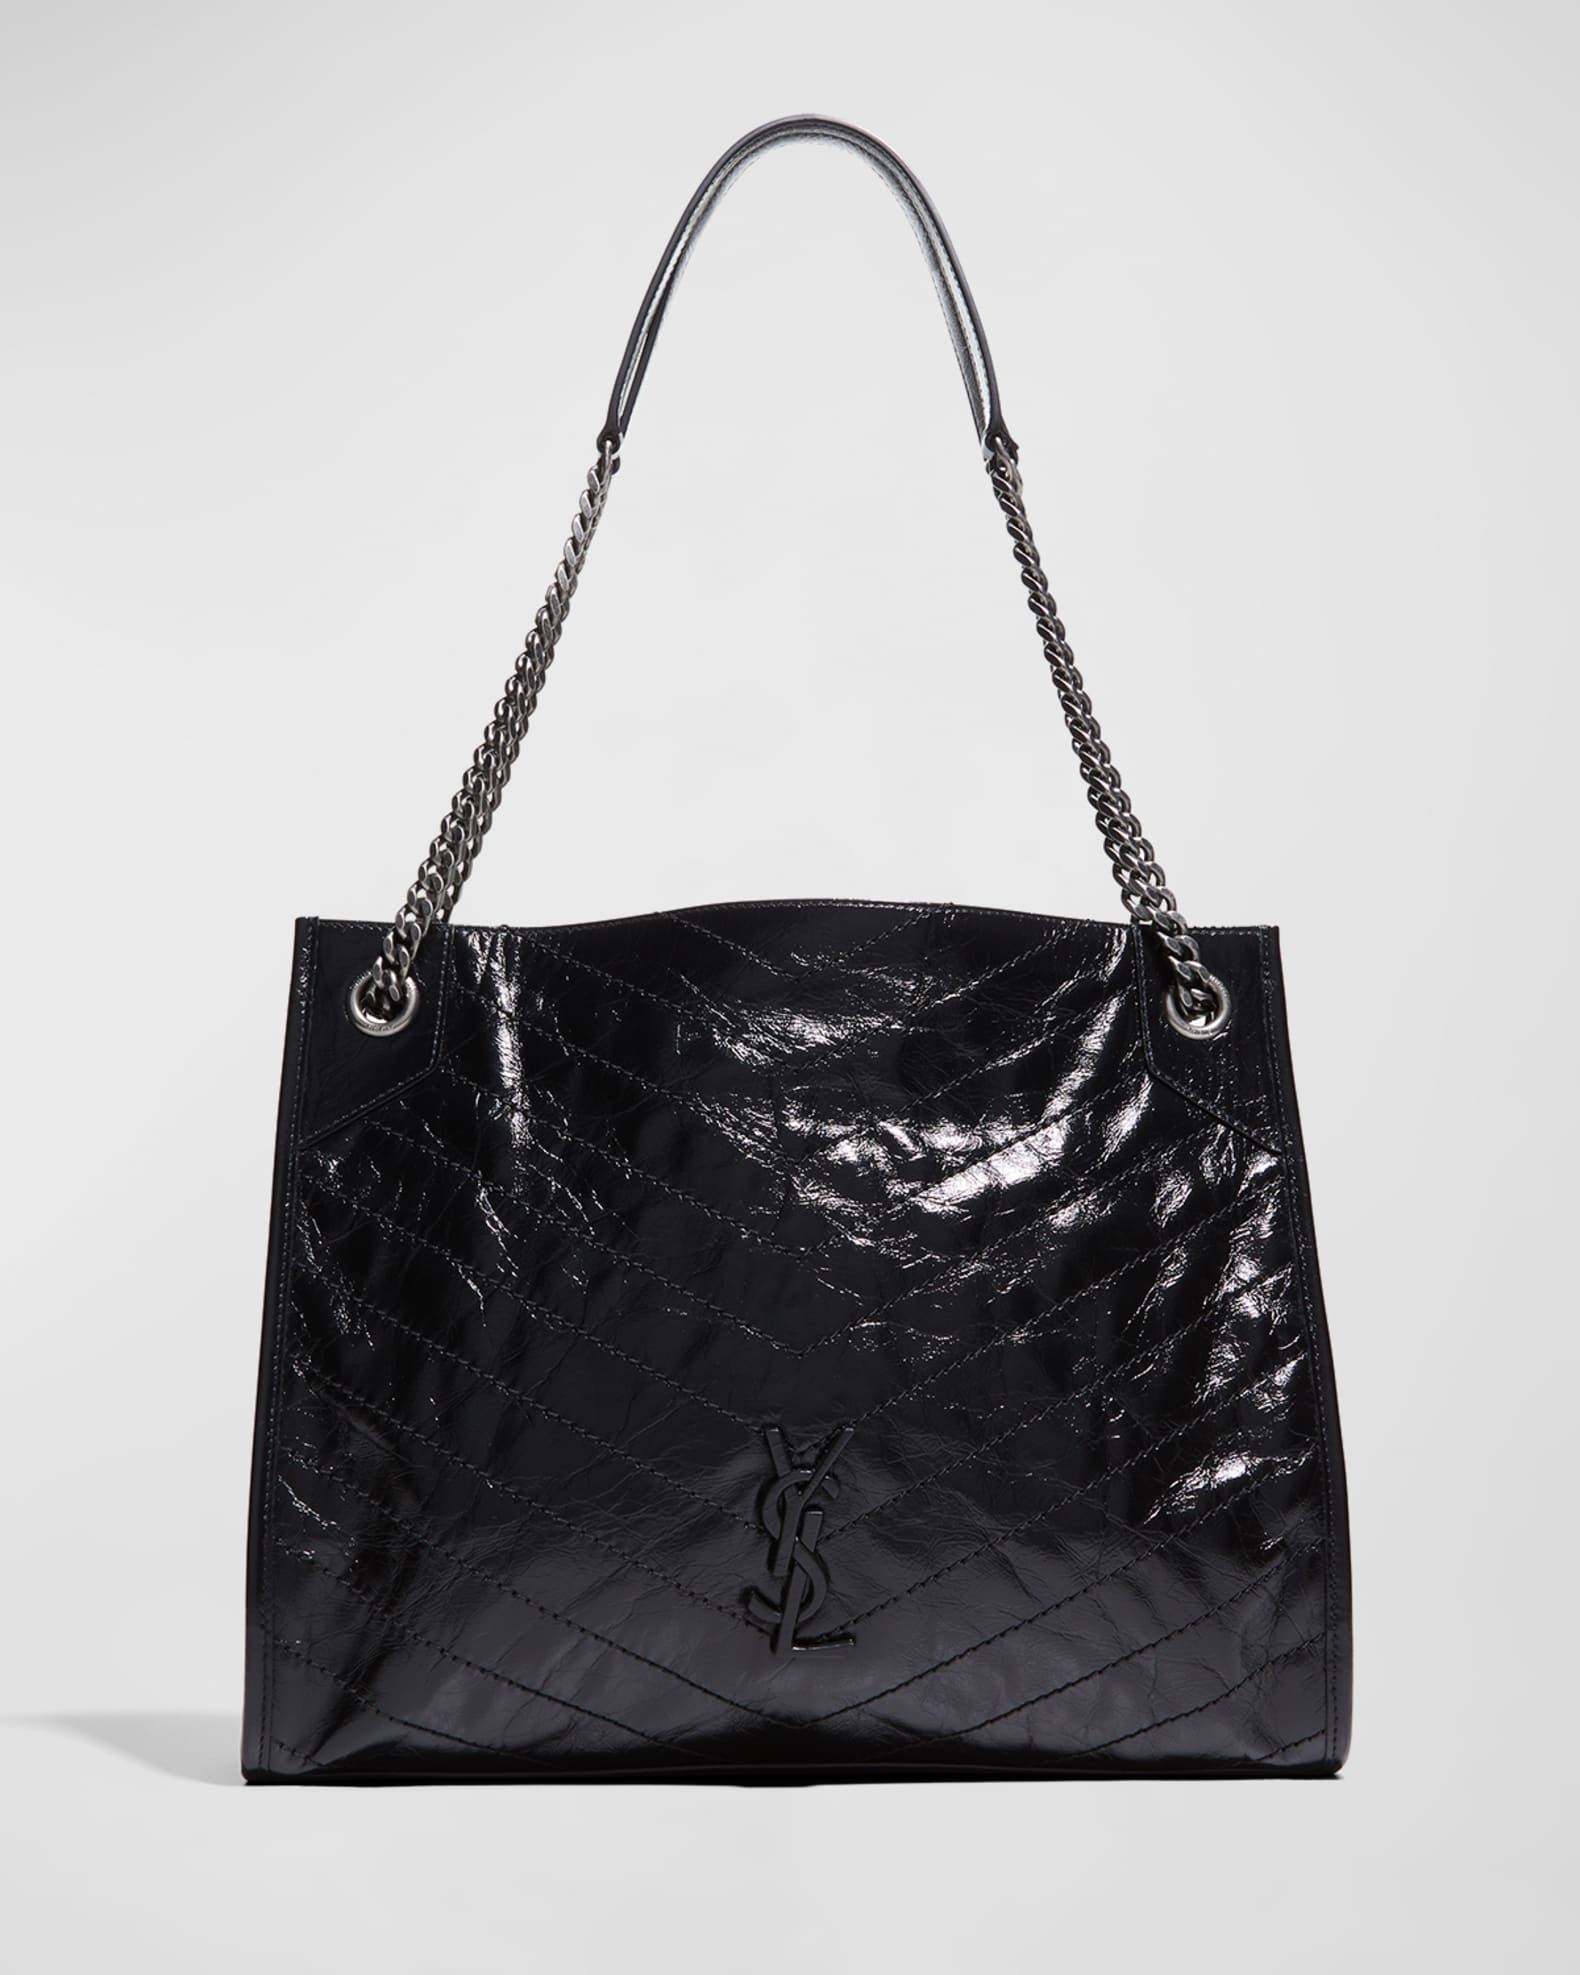 Saint Laurent, Bags, Nwt Ysl Tote Limited Edition